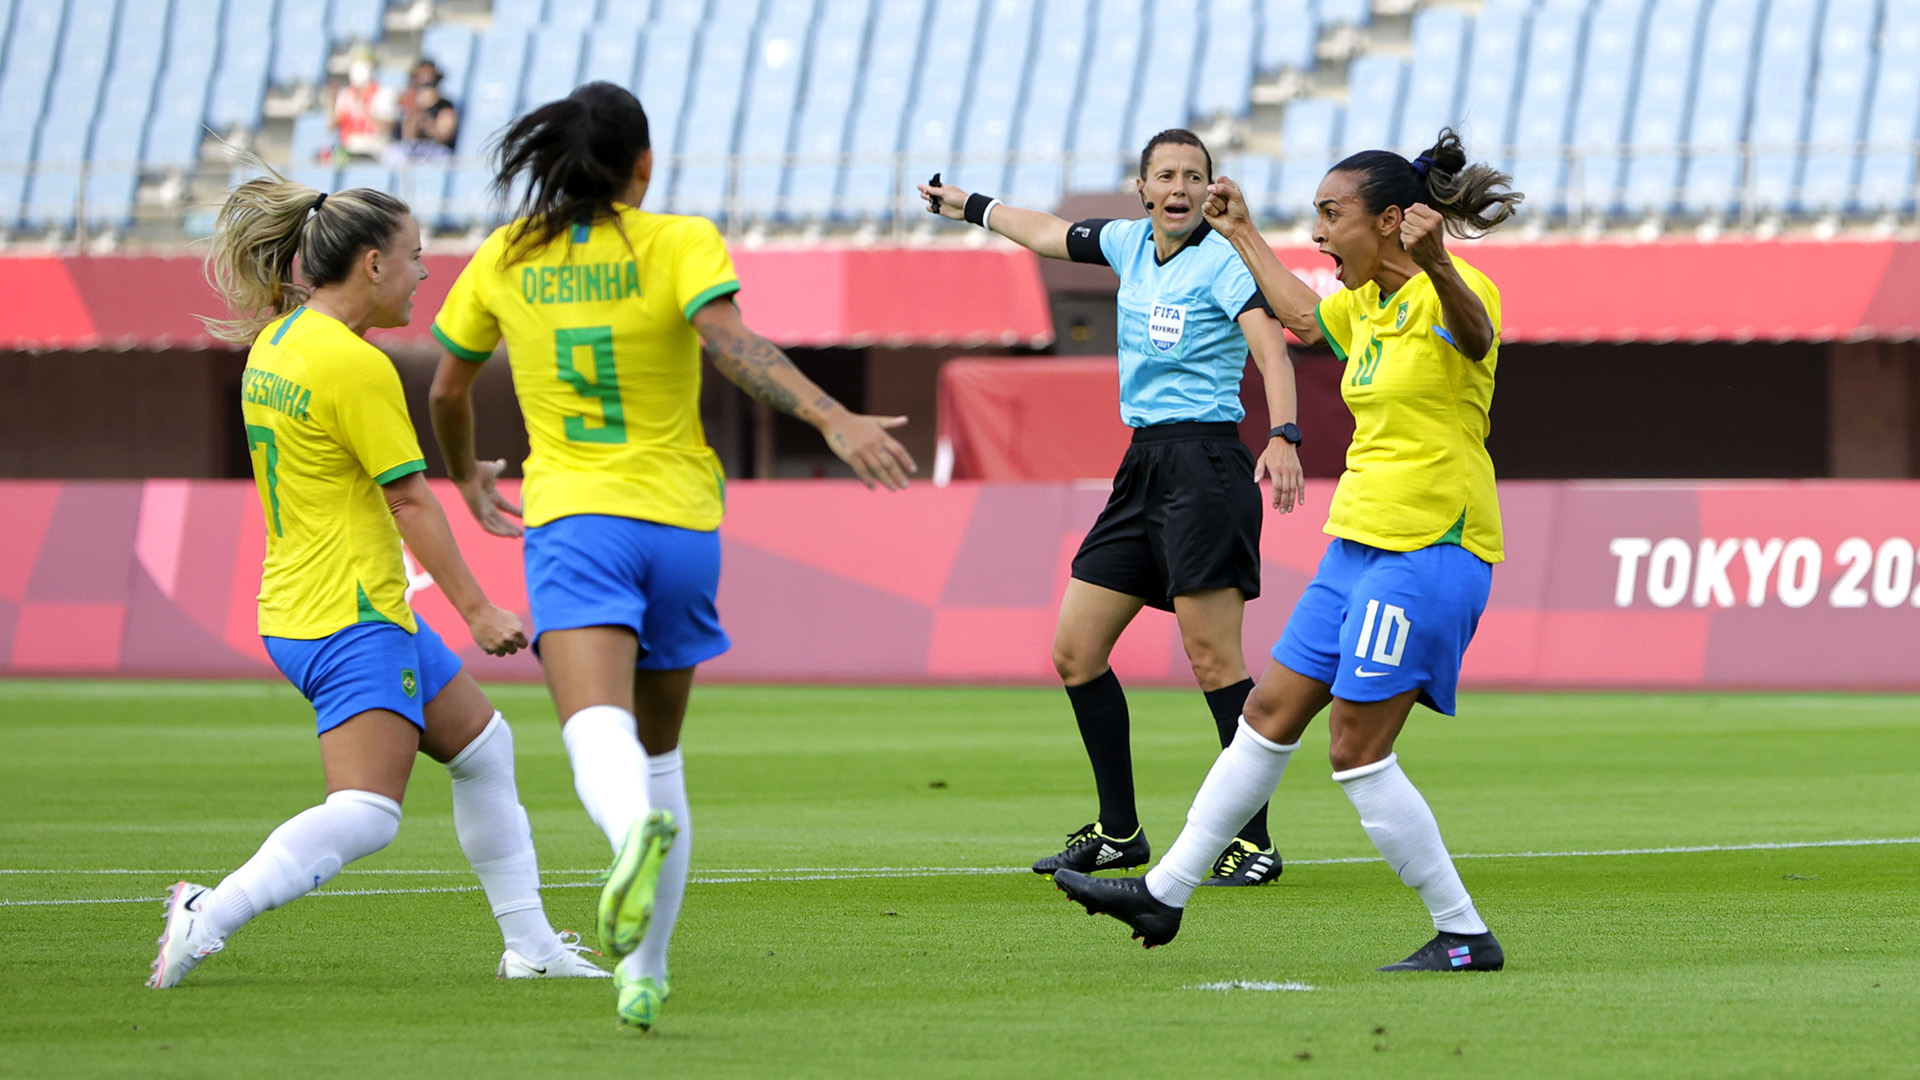 Tokyo Olympics 2020: Marta creates history by becoming first footballer to score in five consecutive Olympic games